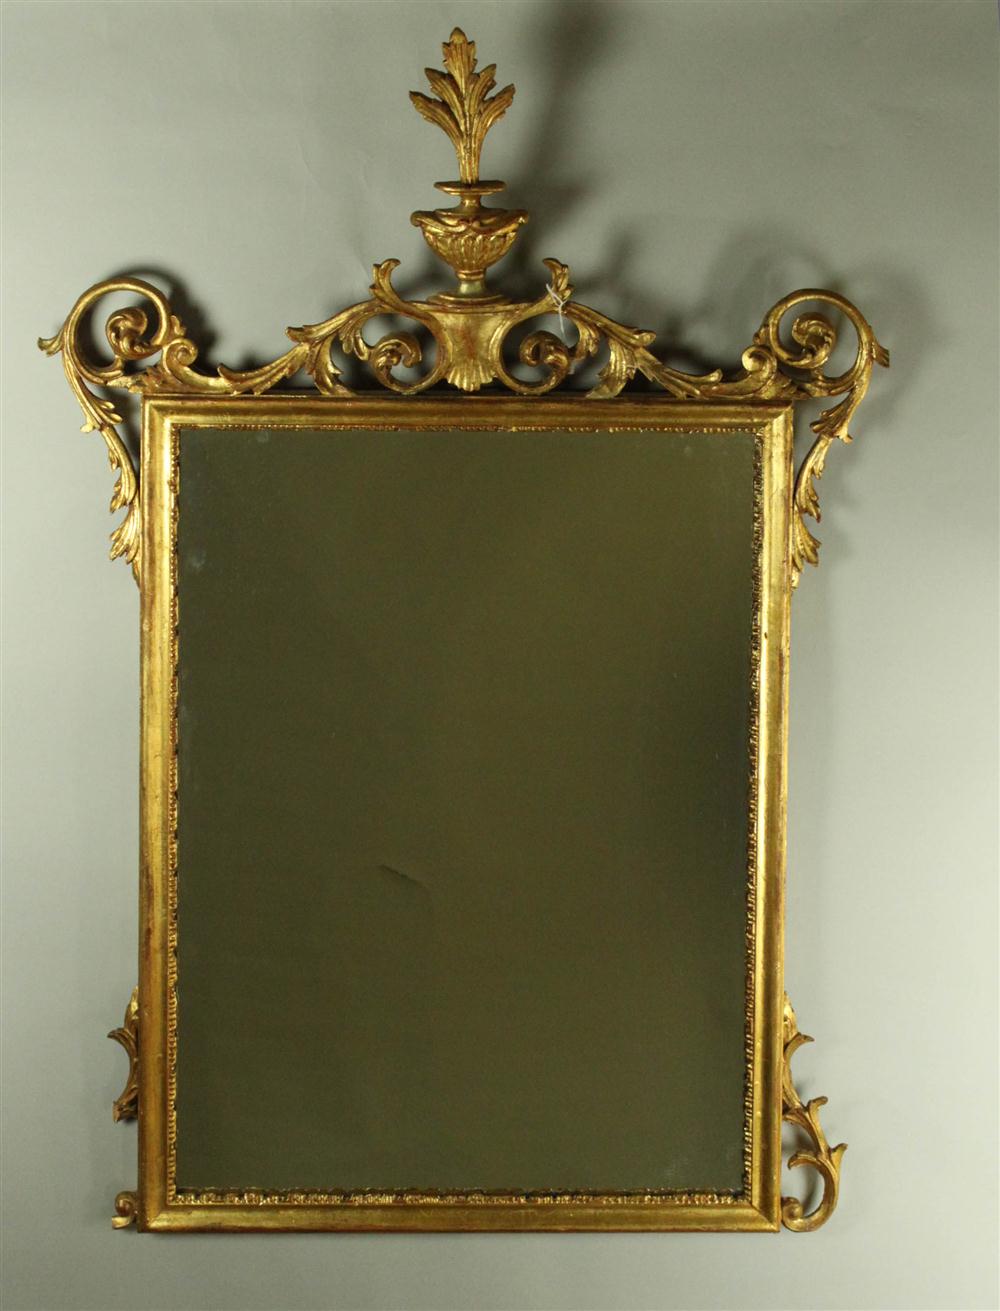 RECTANGULAR MIRROR SURROUNDED BY